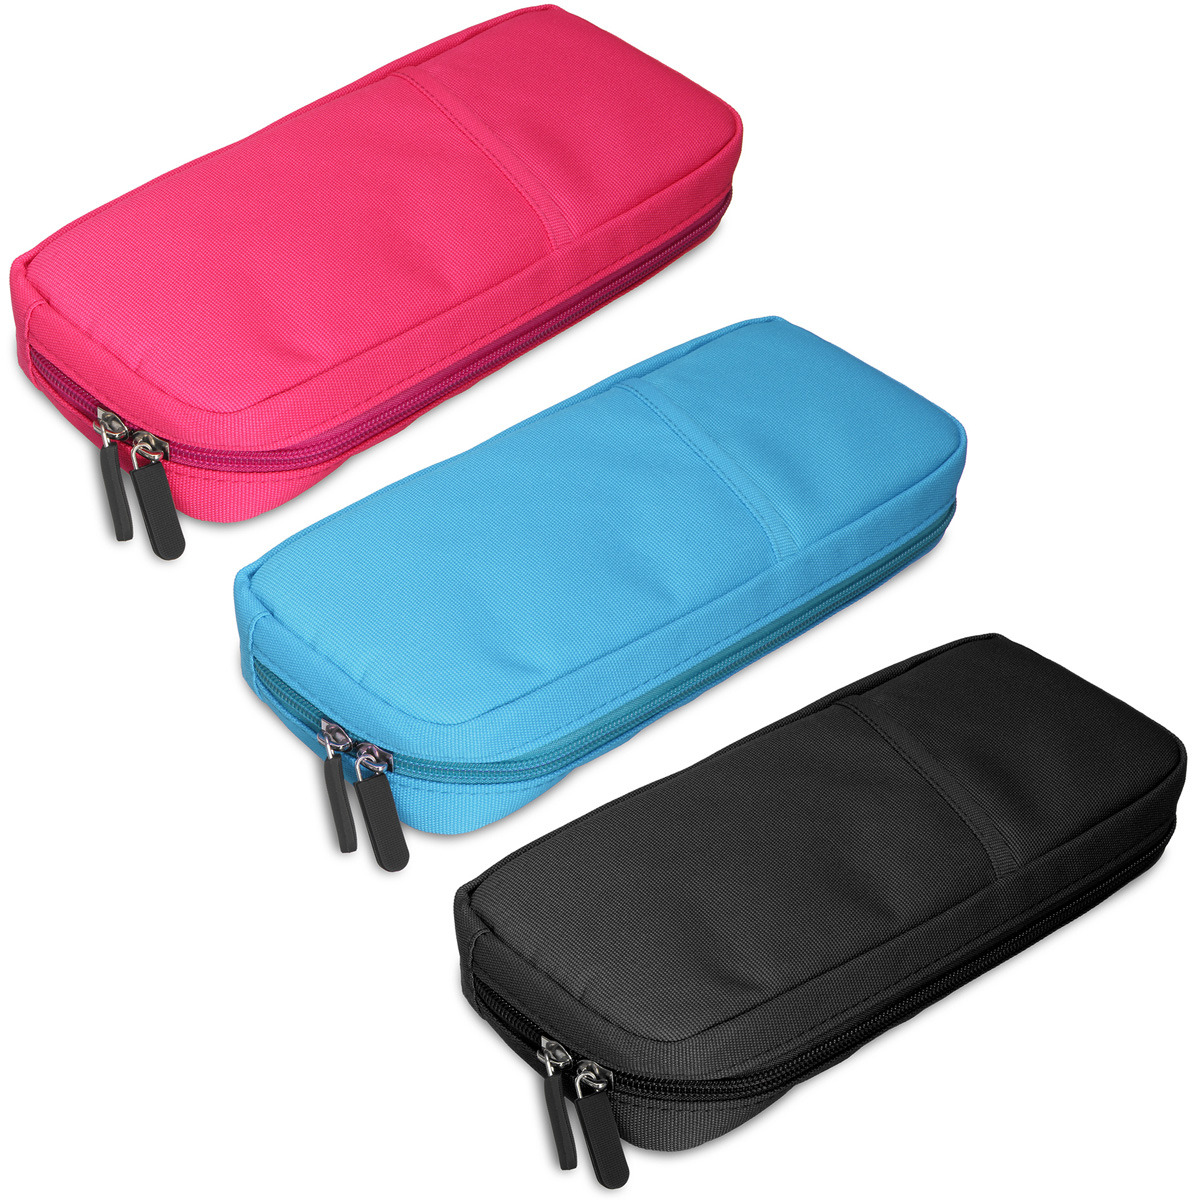 Portable Soft Protective Storage Case Bag For Nintendo Switch Game Console 14